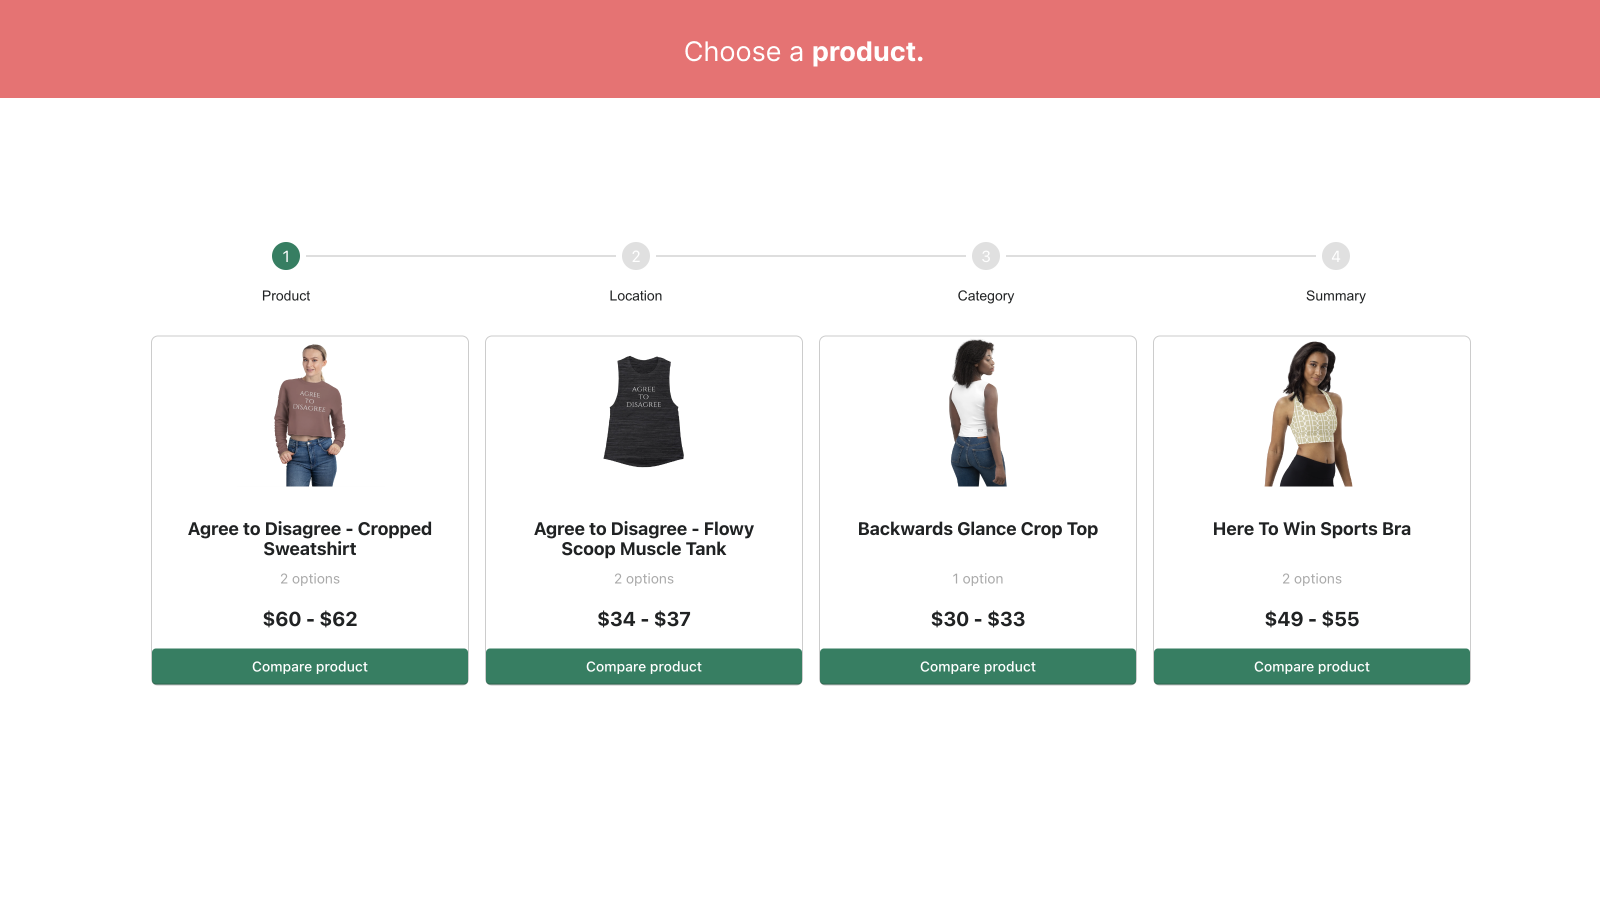 Select your product to compare